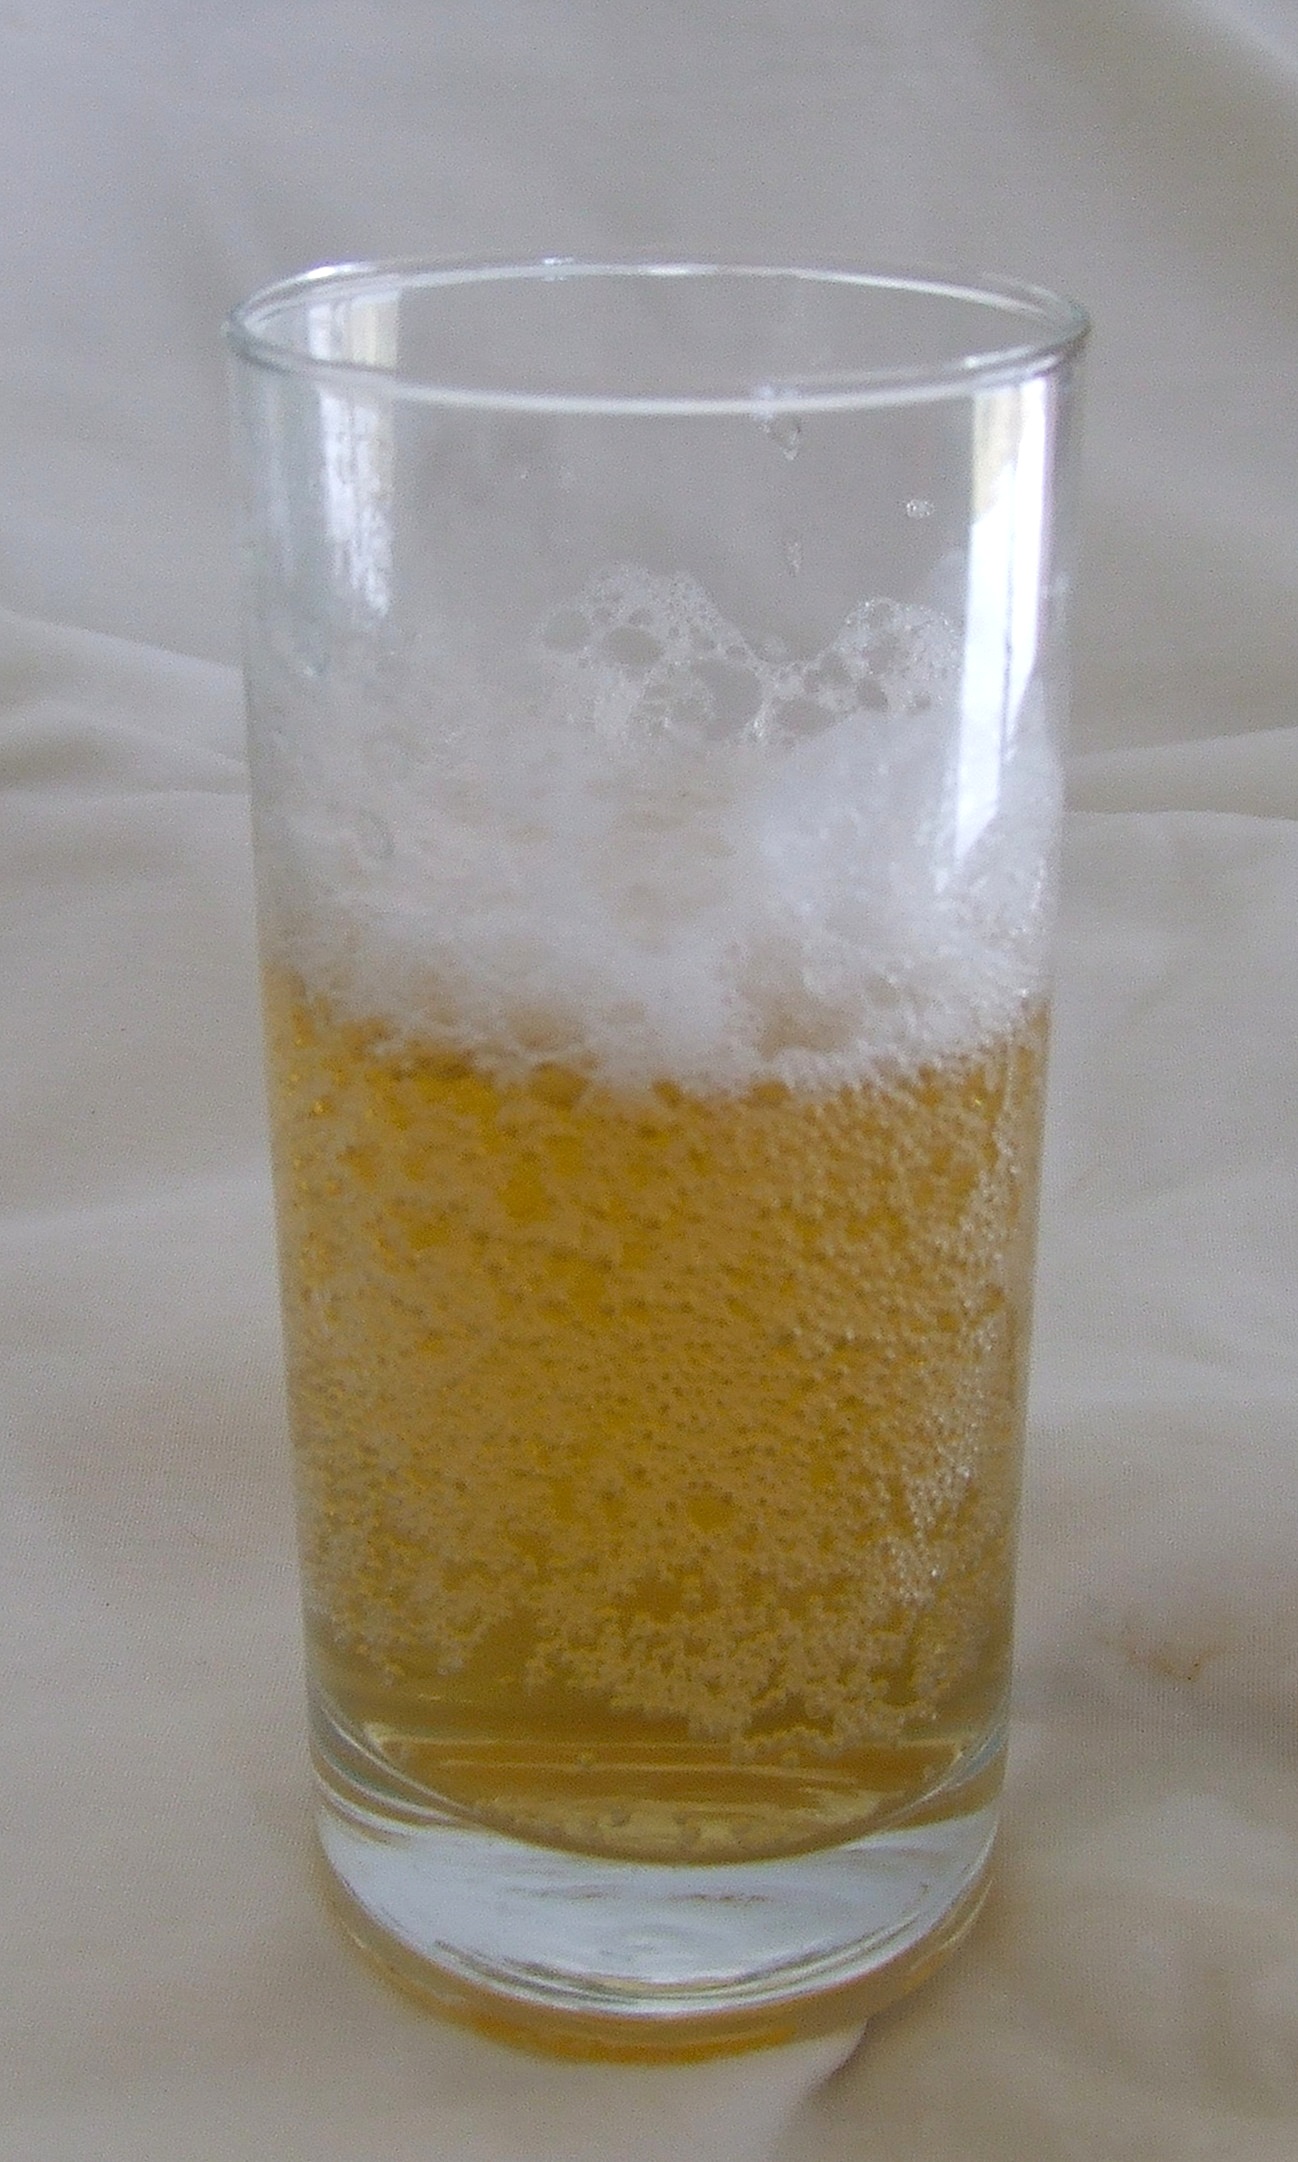 Glass with kombucha, a probiotic drink